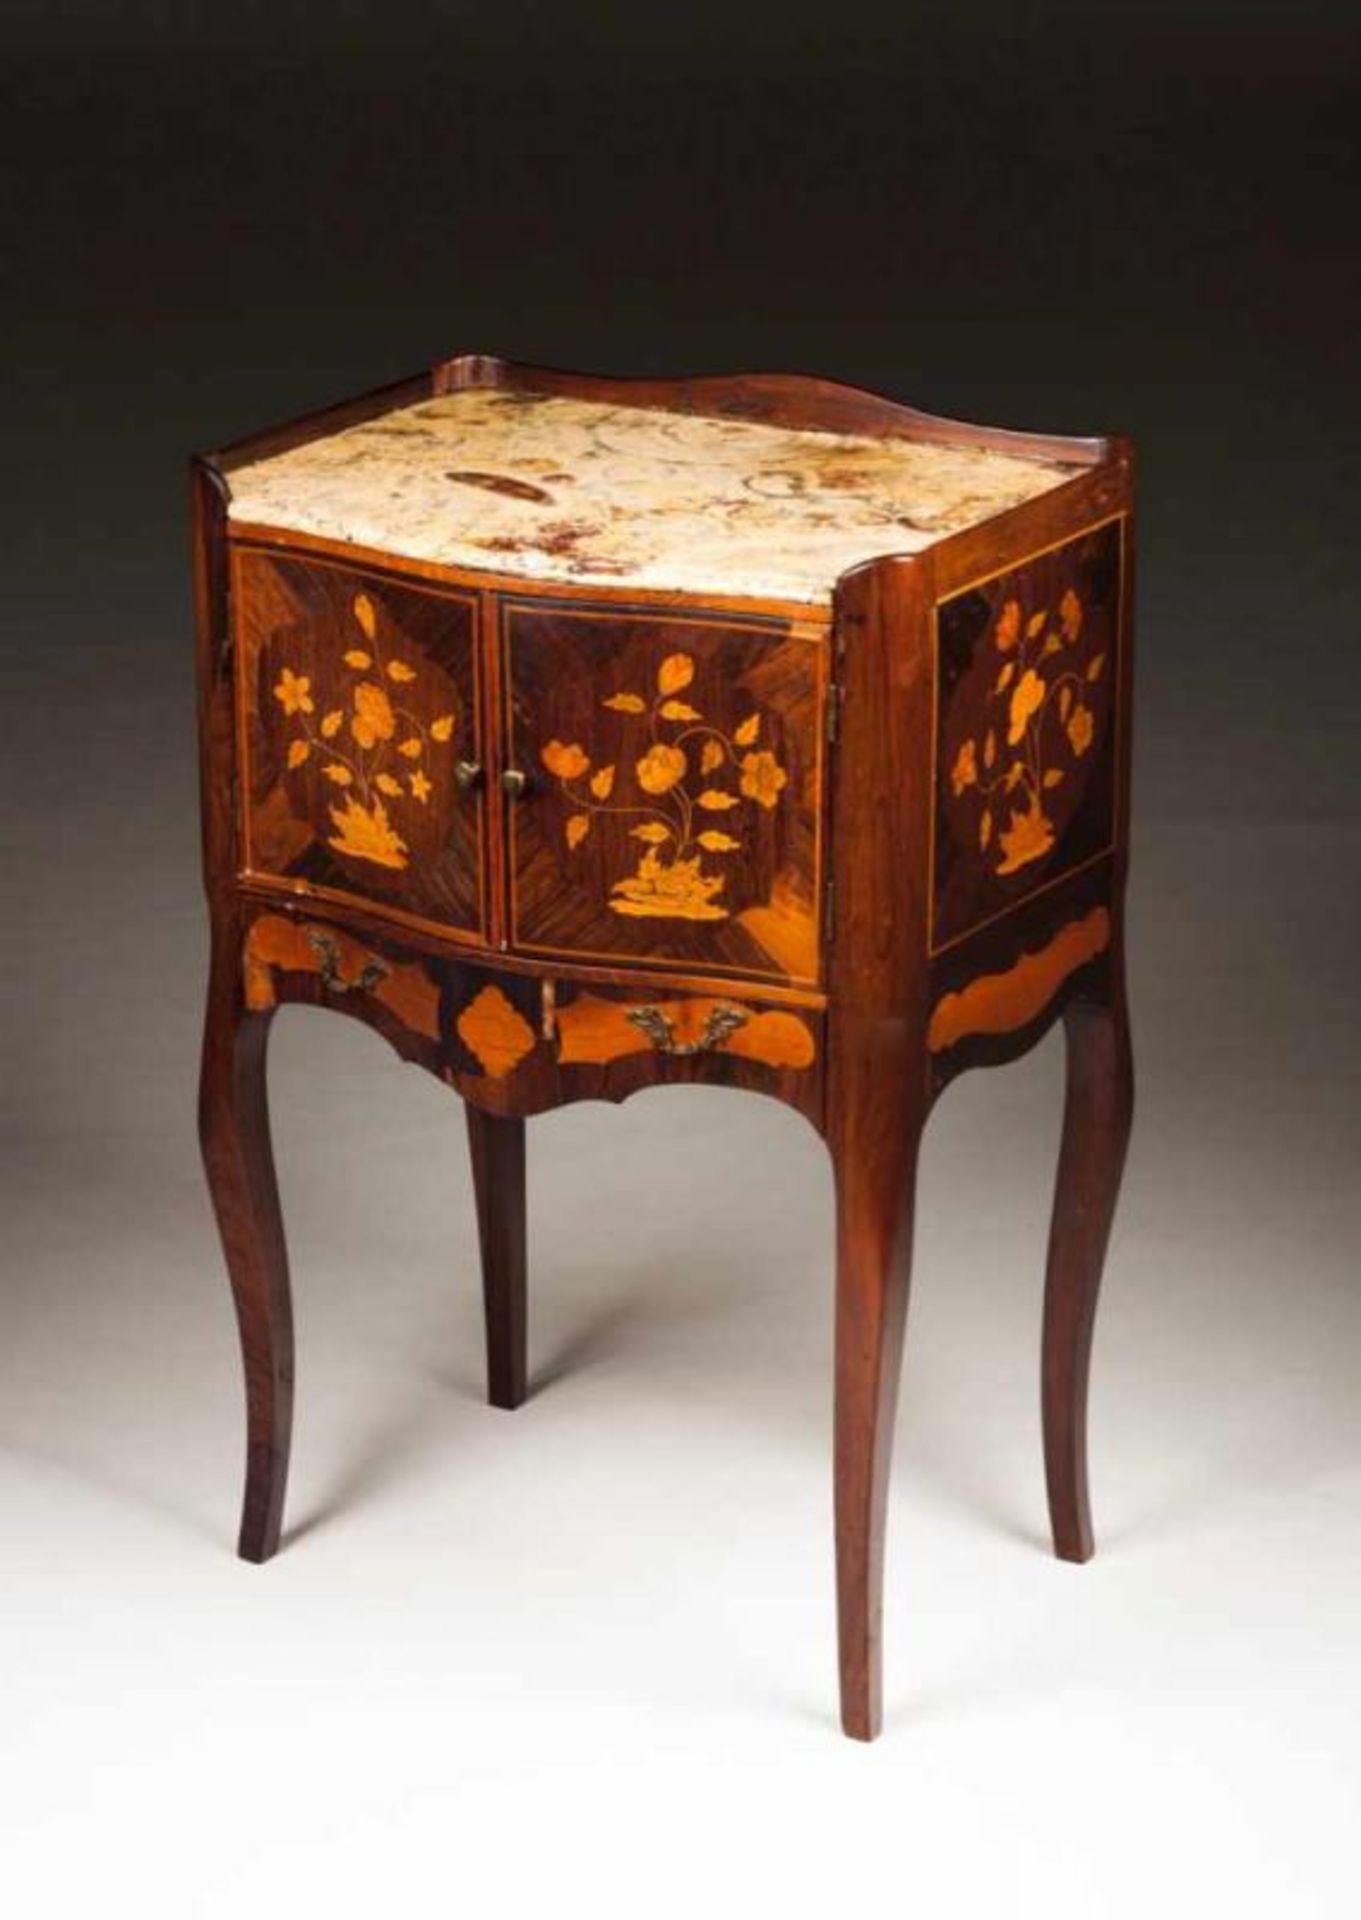 A D. José (1750-1777)/ D. Maria (1777-1816) side table Rosewood Marquetry decoration with floral